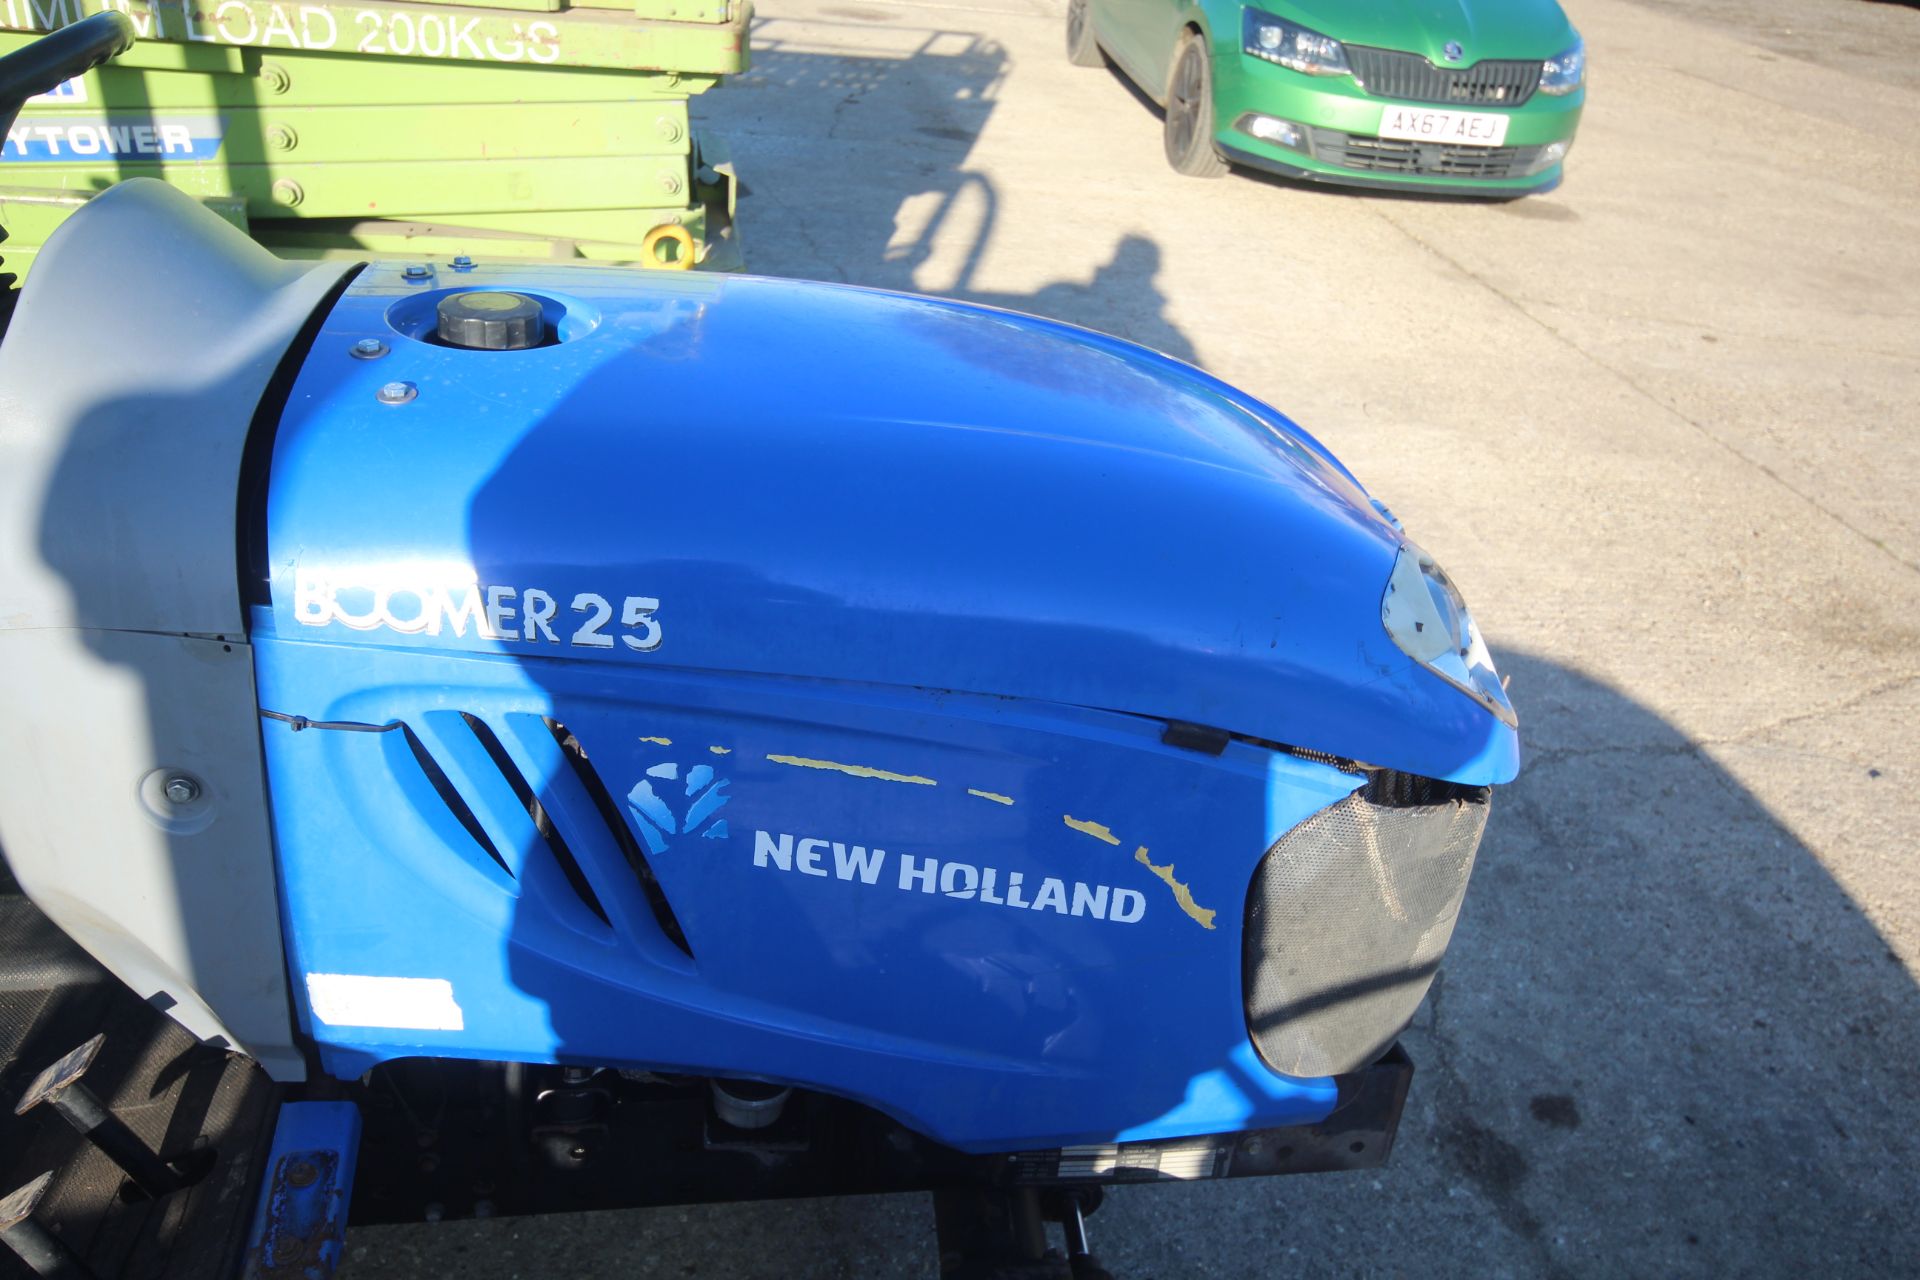 **UPDATED DESCRIPTION** New Holland Boomer 25 4WD compact tractor. Registration AY17 AHF. Date of - Image 35 of 45